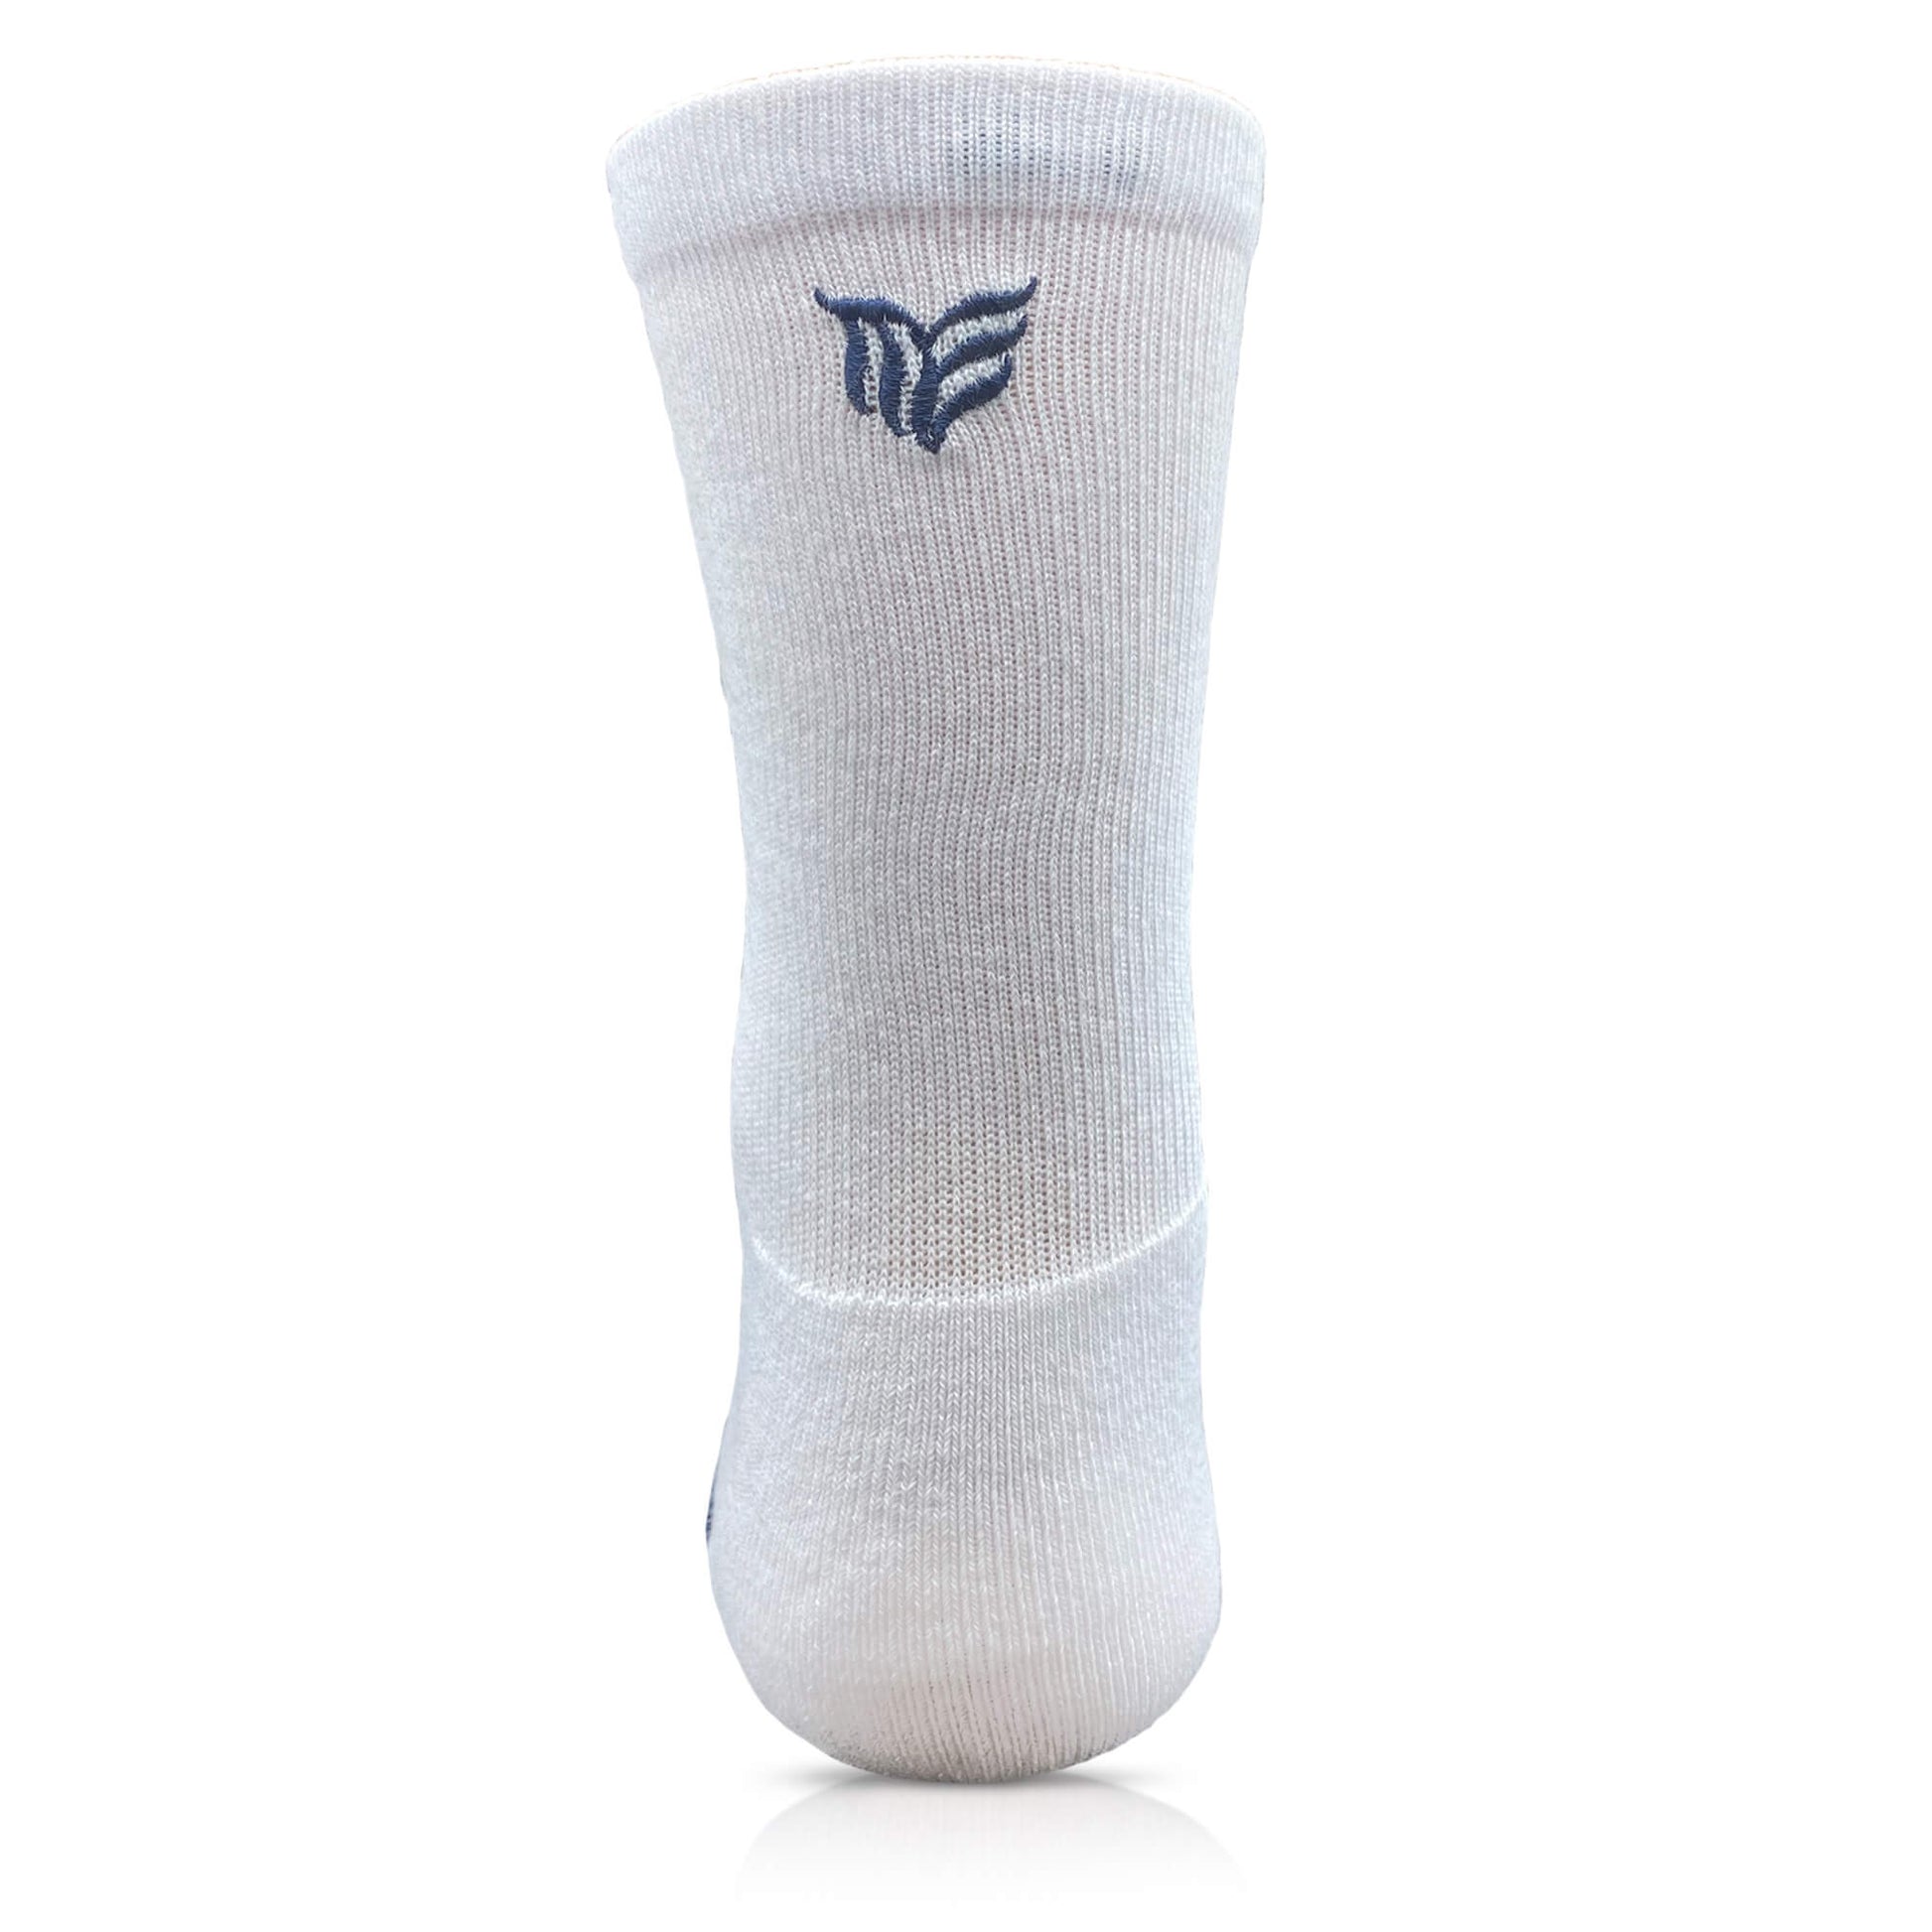 Modern Envy comfy crew socks White and Navy Blue back view